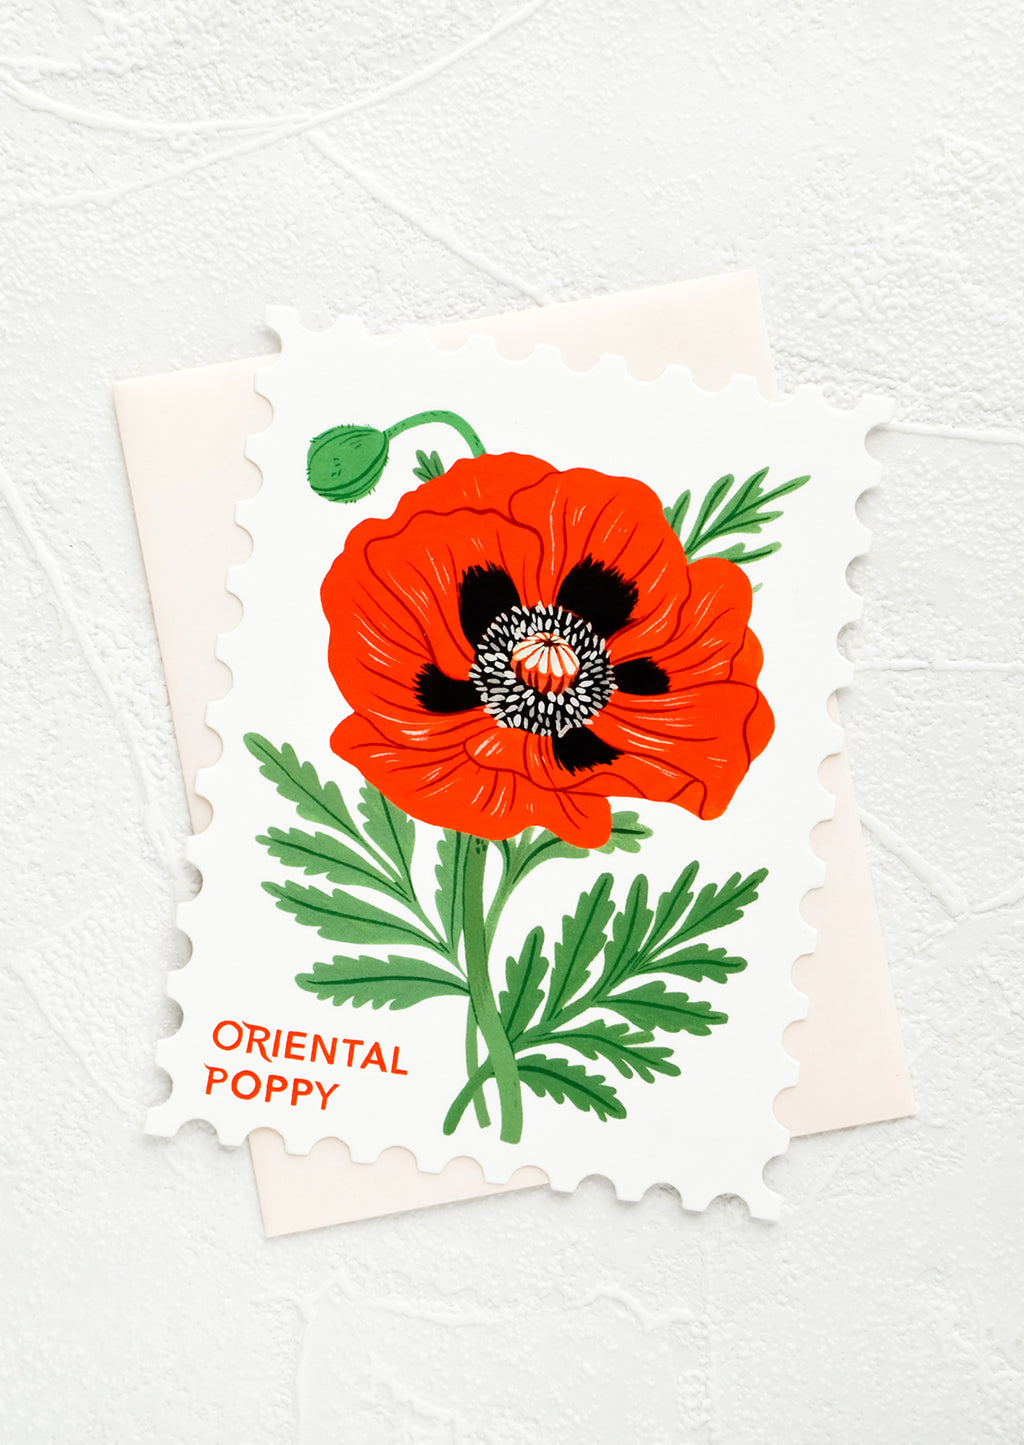 Oriental Poppy: Diecut greeting card in the shape of a postage stamp, printed graphic of Oriental Poppy floral.